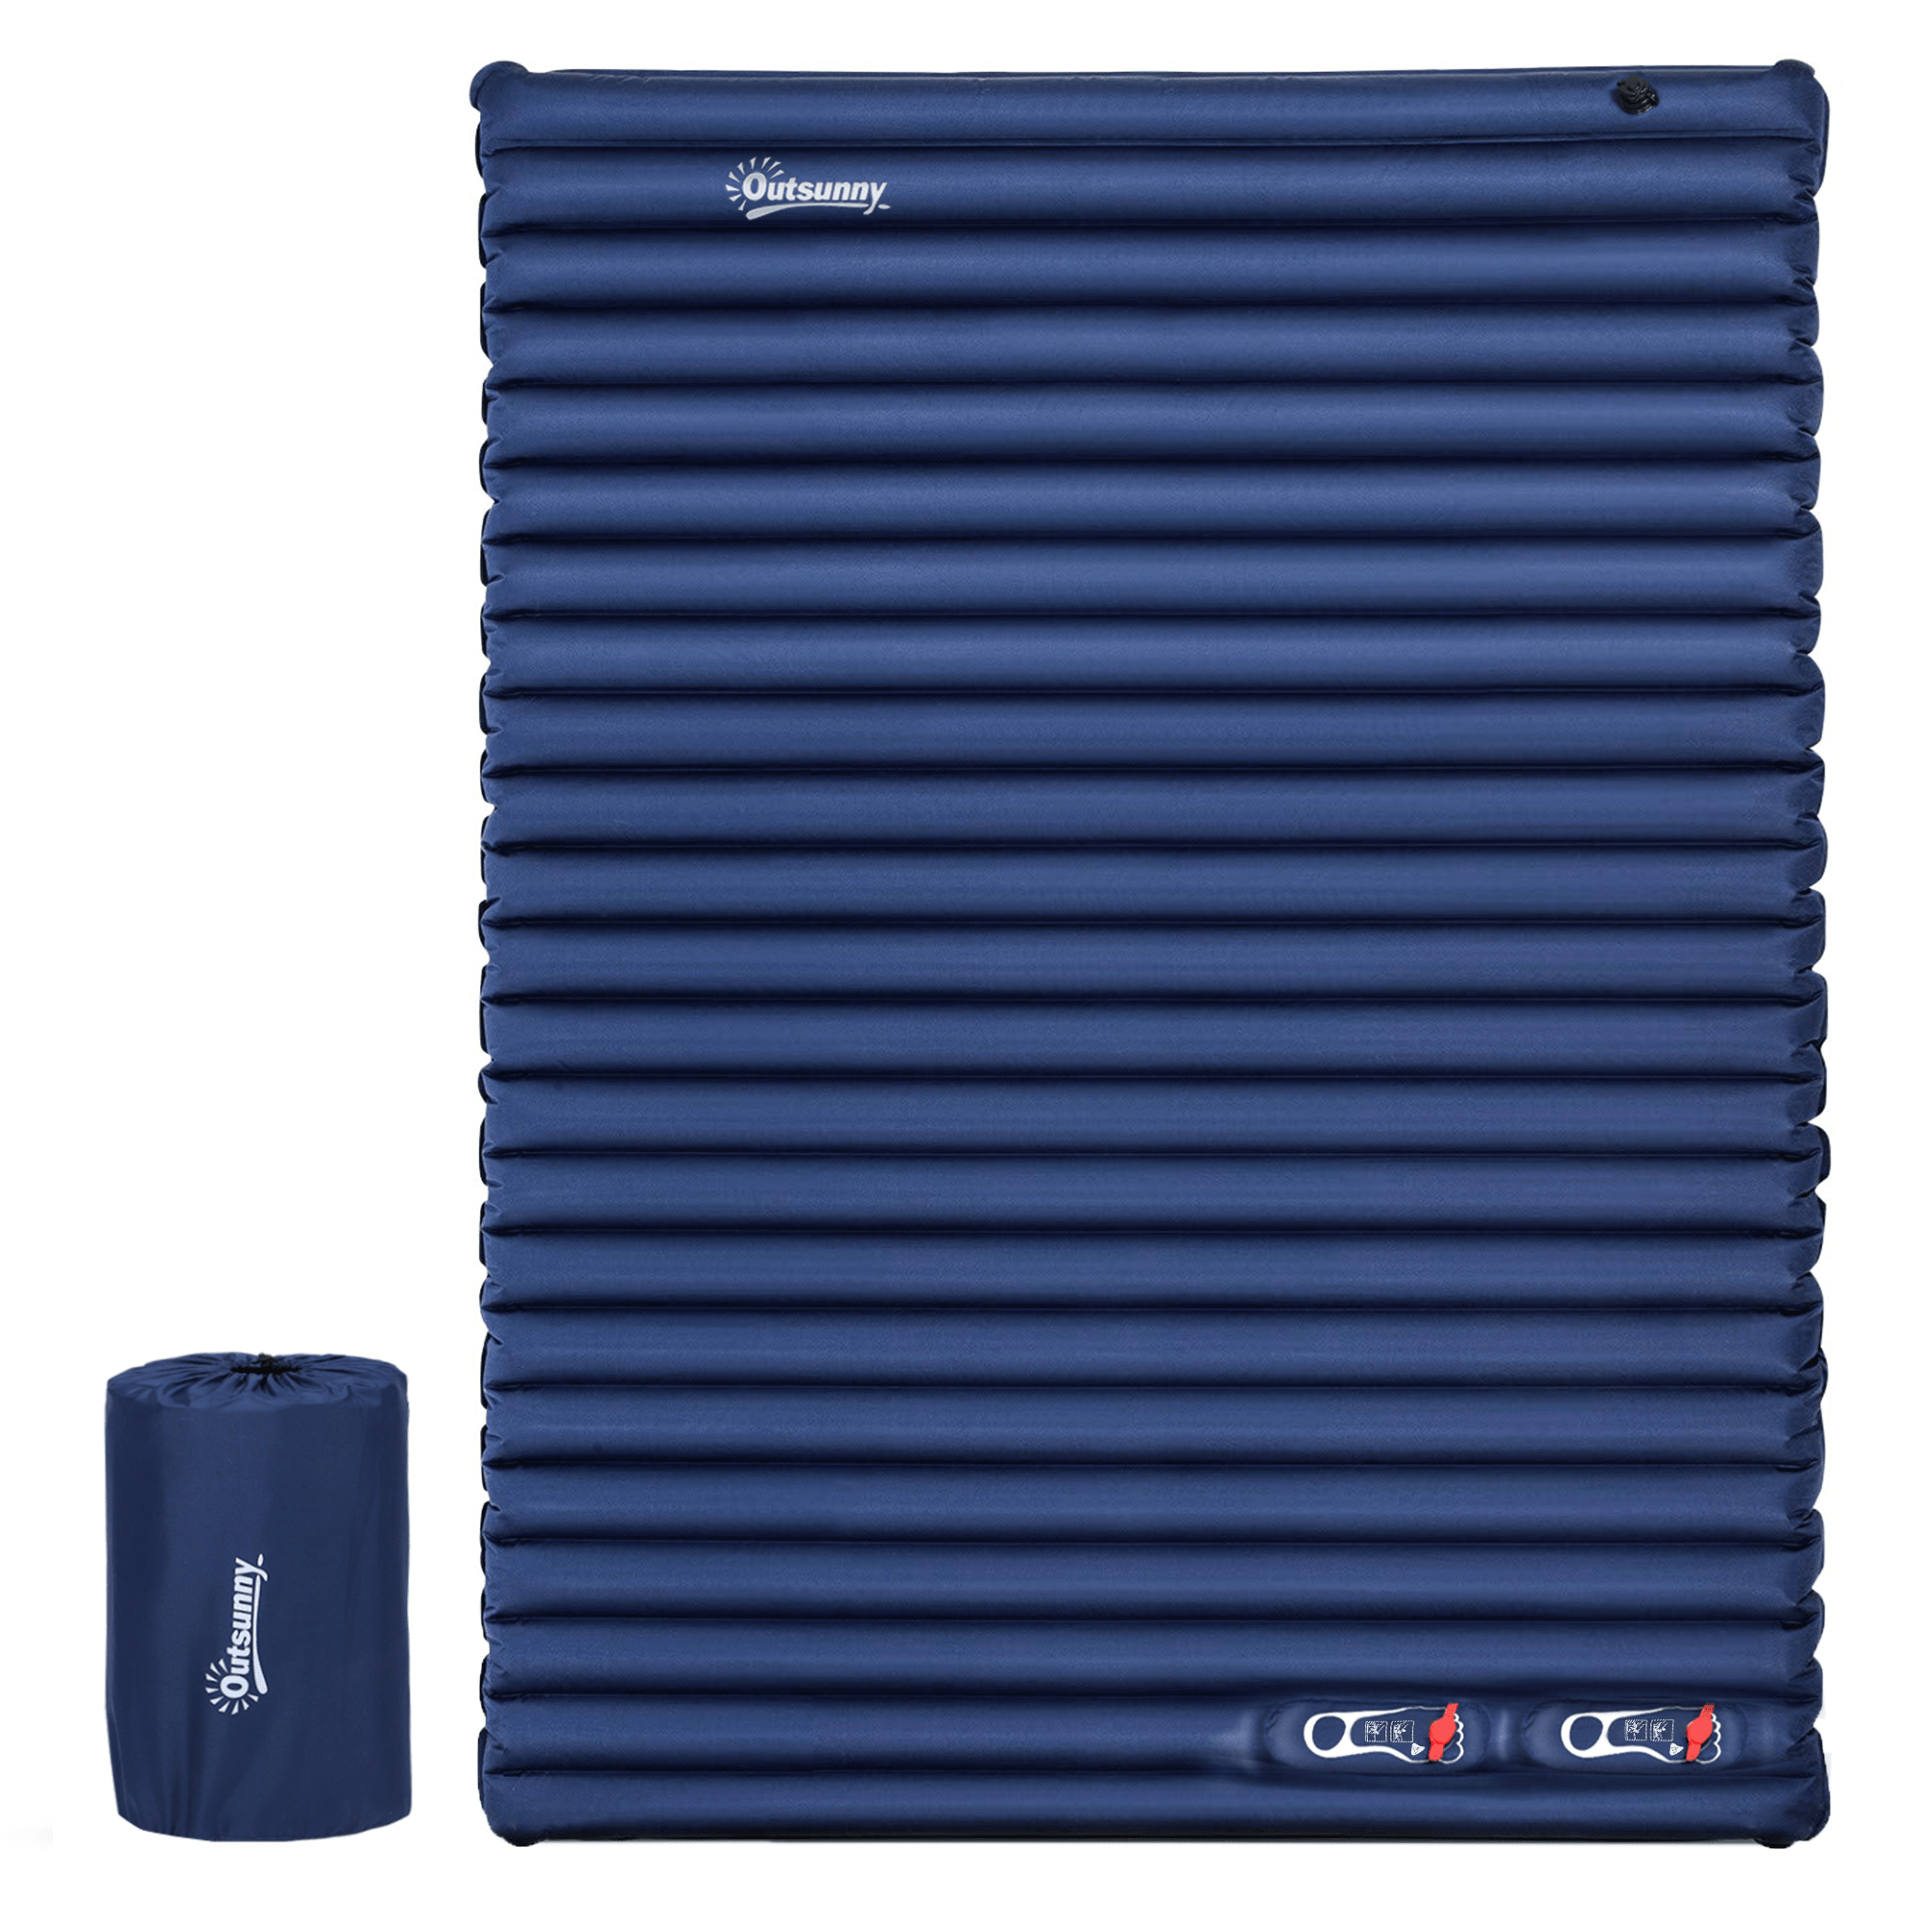 Outsunny 2 Person Camping Inflating Sleeping Mat Sleeping Mats and Airbeds Cosy Camping Co. Navy Blue  